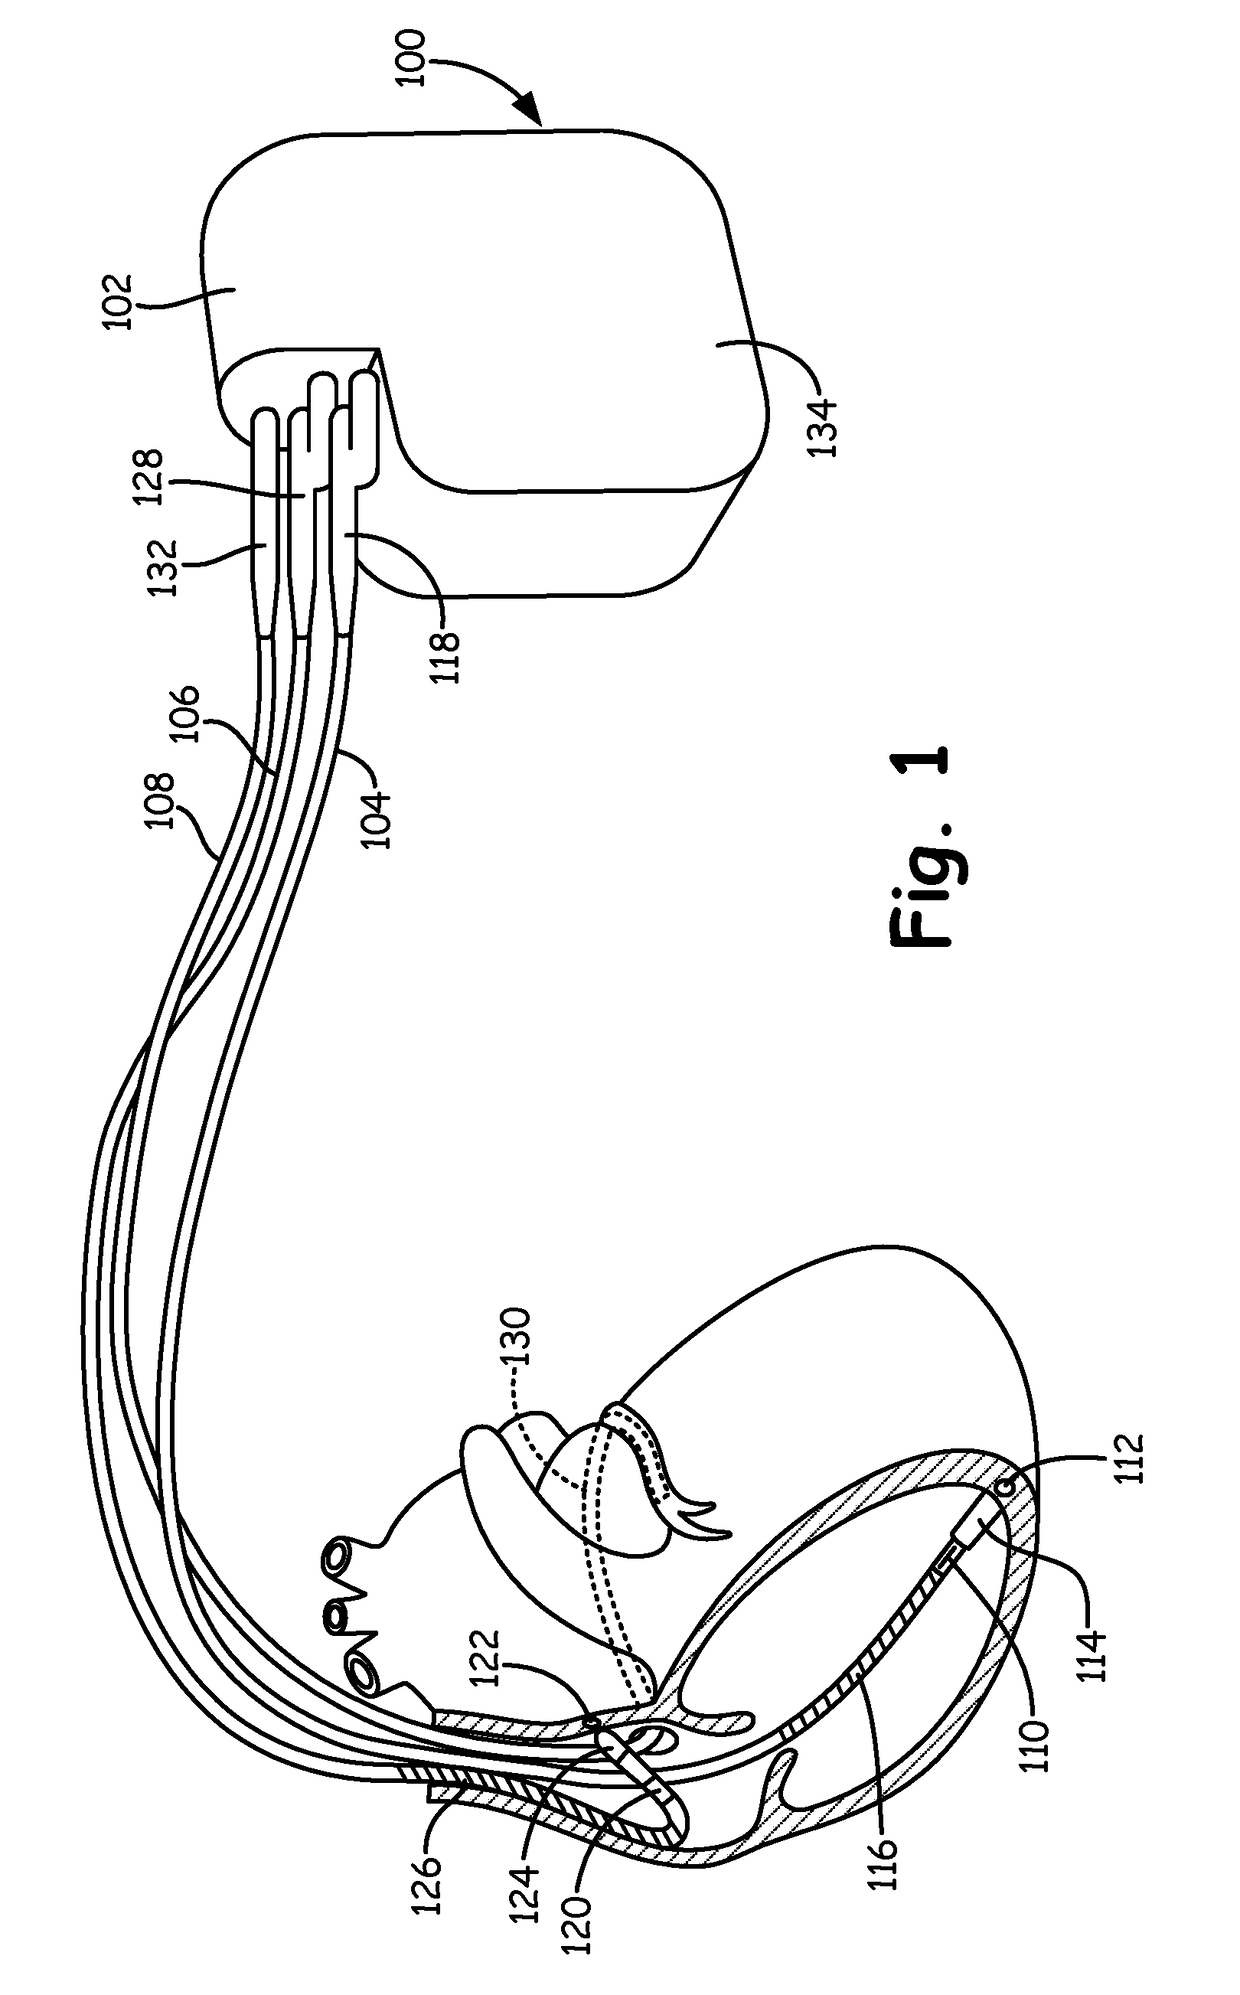 Method and apparatus for verifying bradycardia/asystole episodes via detection of under-sensed events